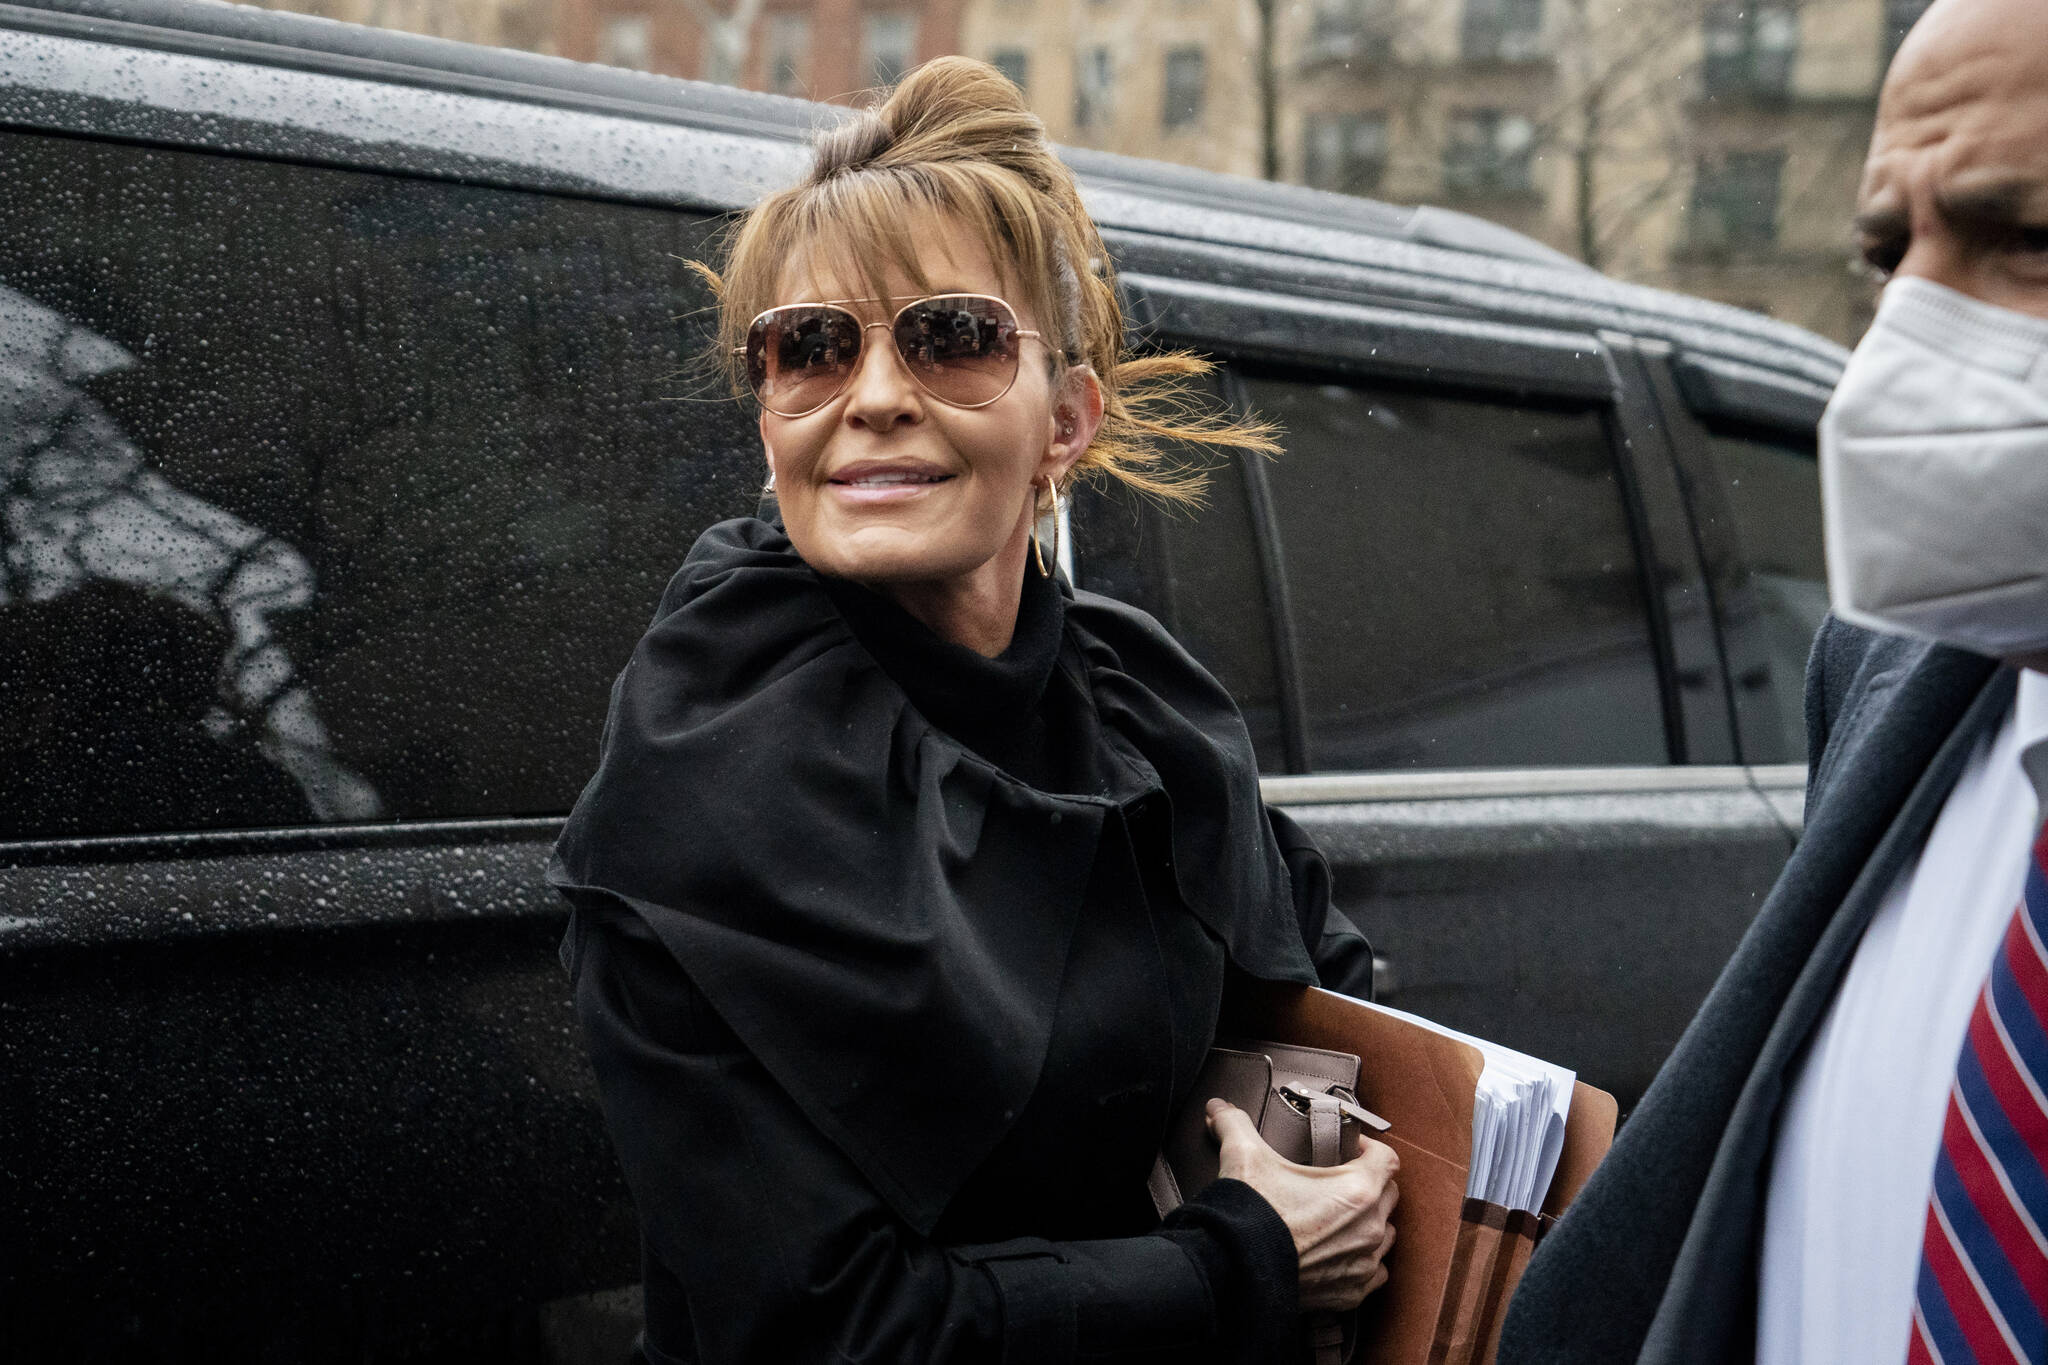 Former Alaska Gov. Sarah Palin arrives to Federal court, Thursday, Feb. 3, 2022, in New York. Palin is due back in a New York City courtroom more than a week after her libel trial against The New York Times was postponed because she tested positive for COVID-19. (AP Photo / John Minchillo)